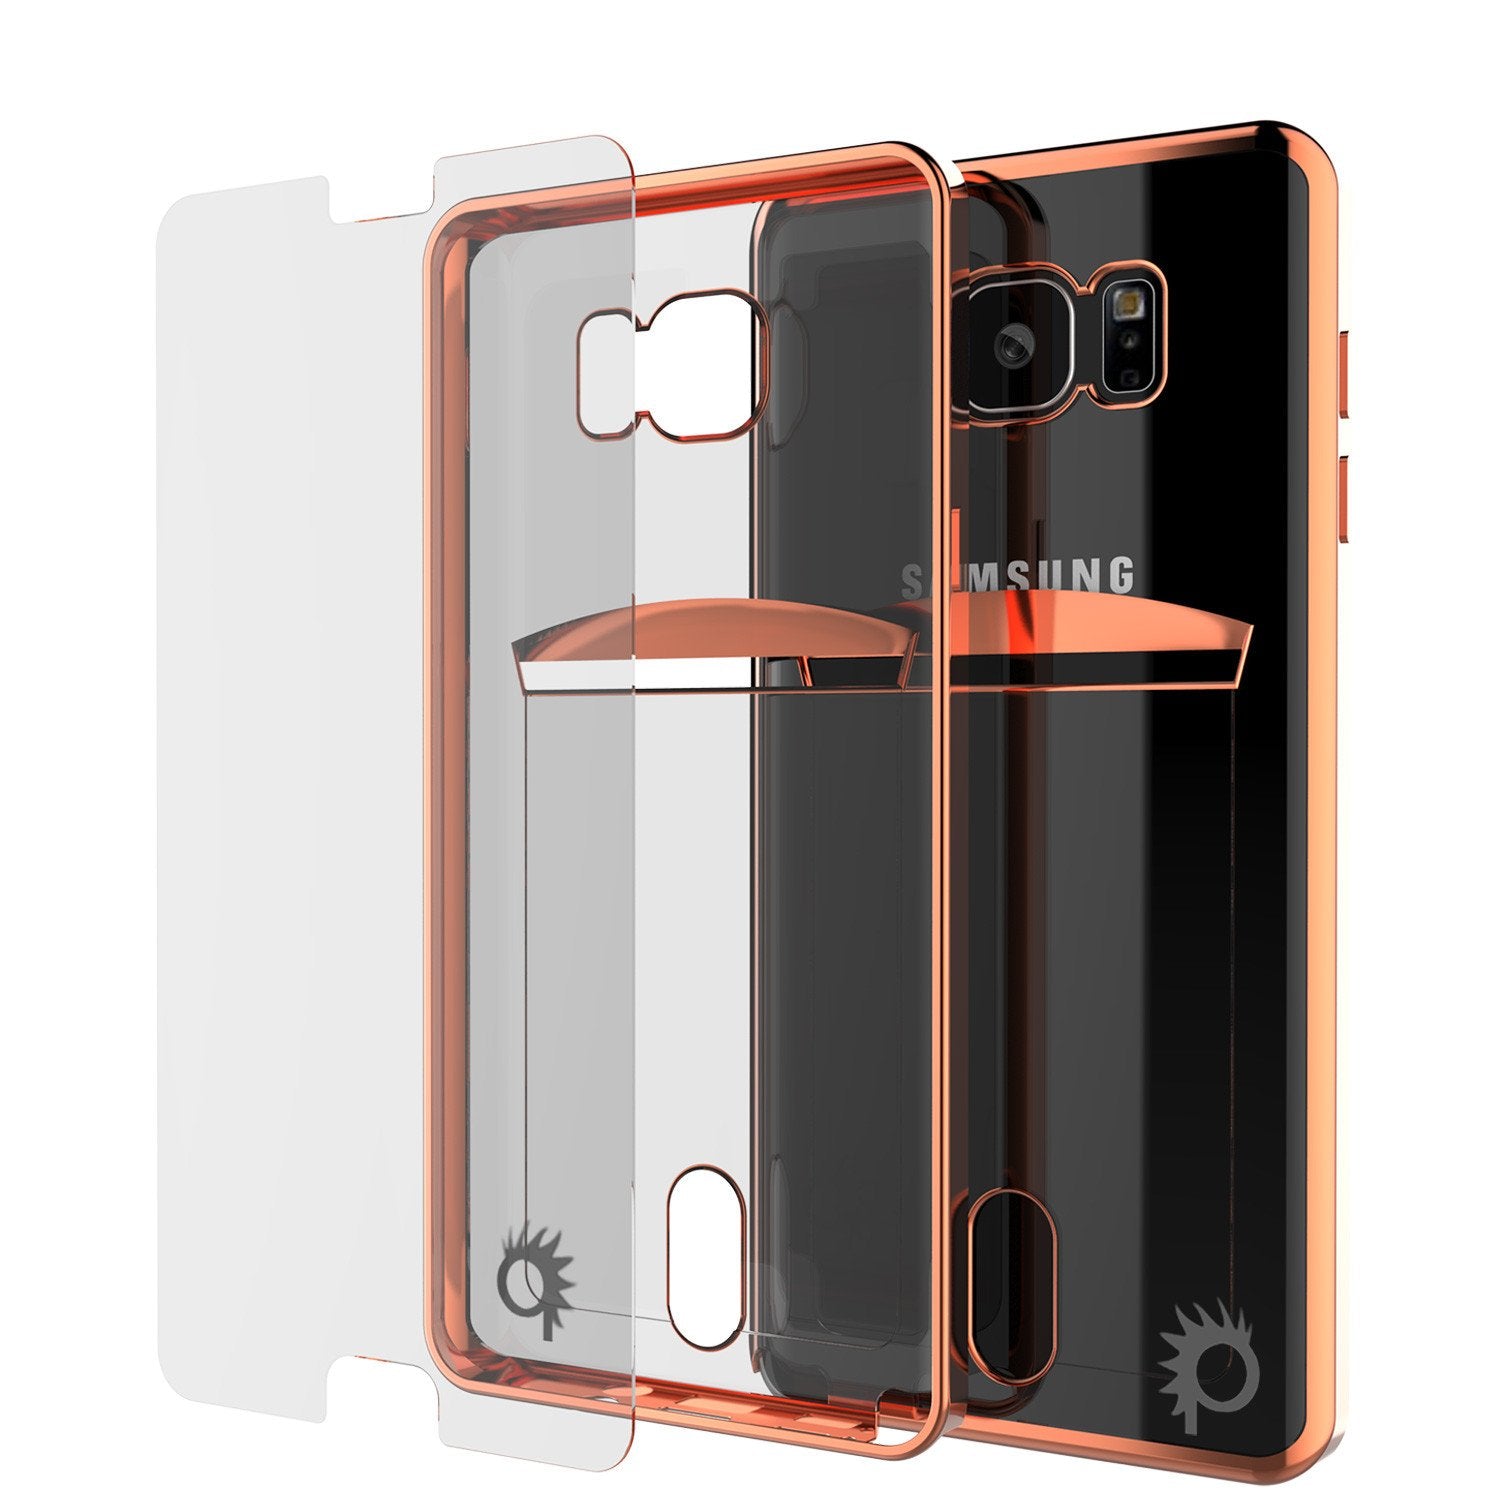 Galaxy Note 5 Case, PUNKCASE® LUCID Rose Gold Series | Card Slot | SHIELD Screen Protector